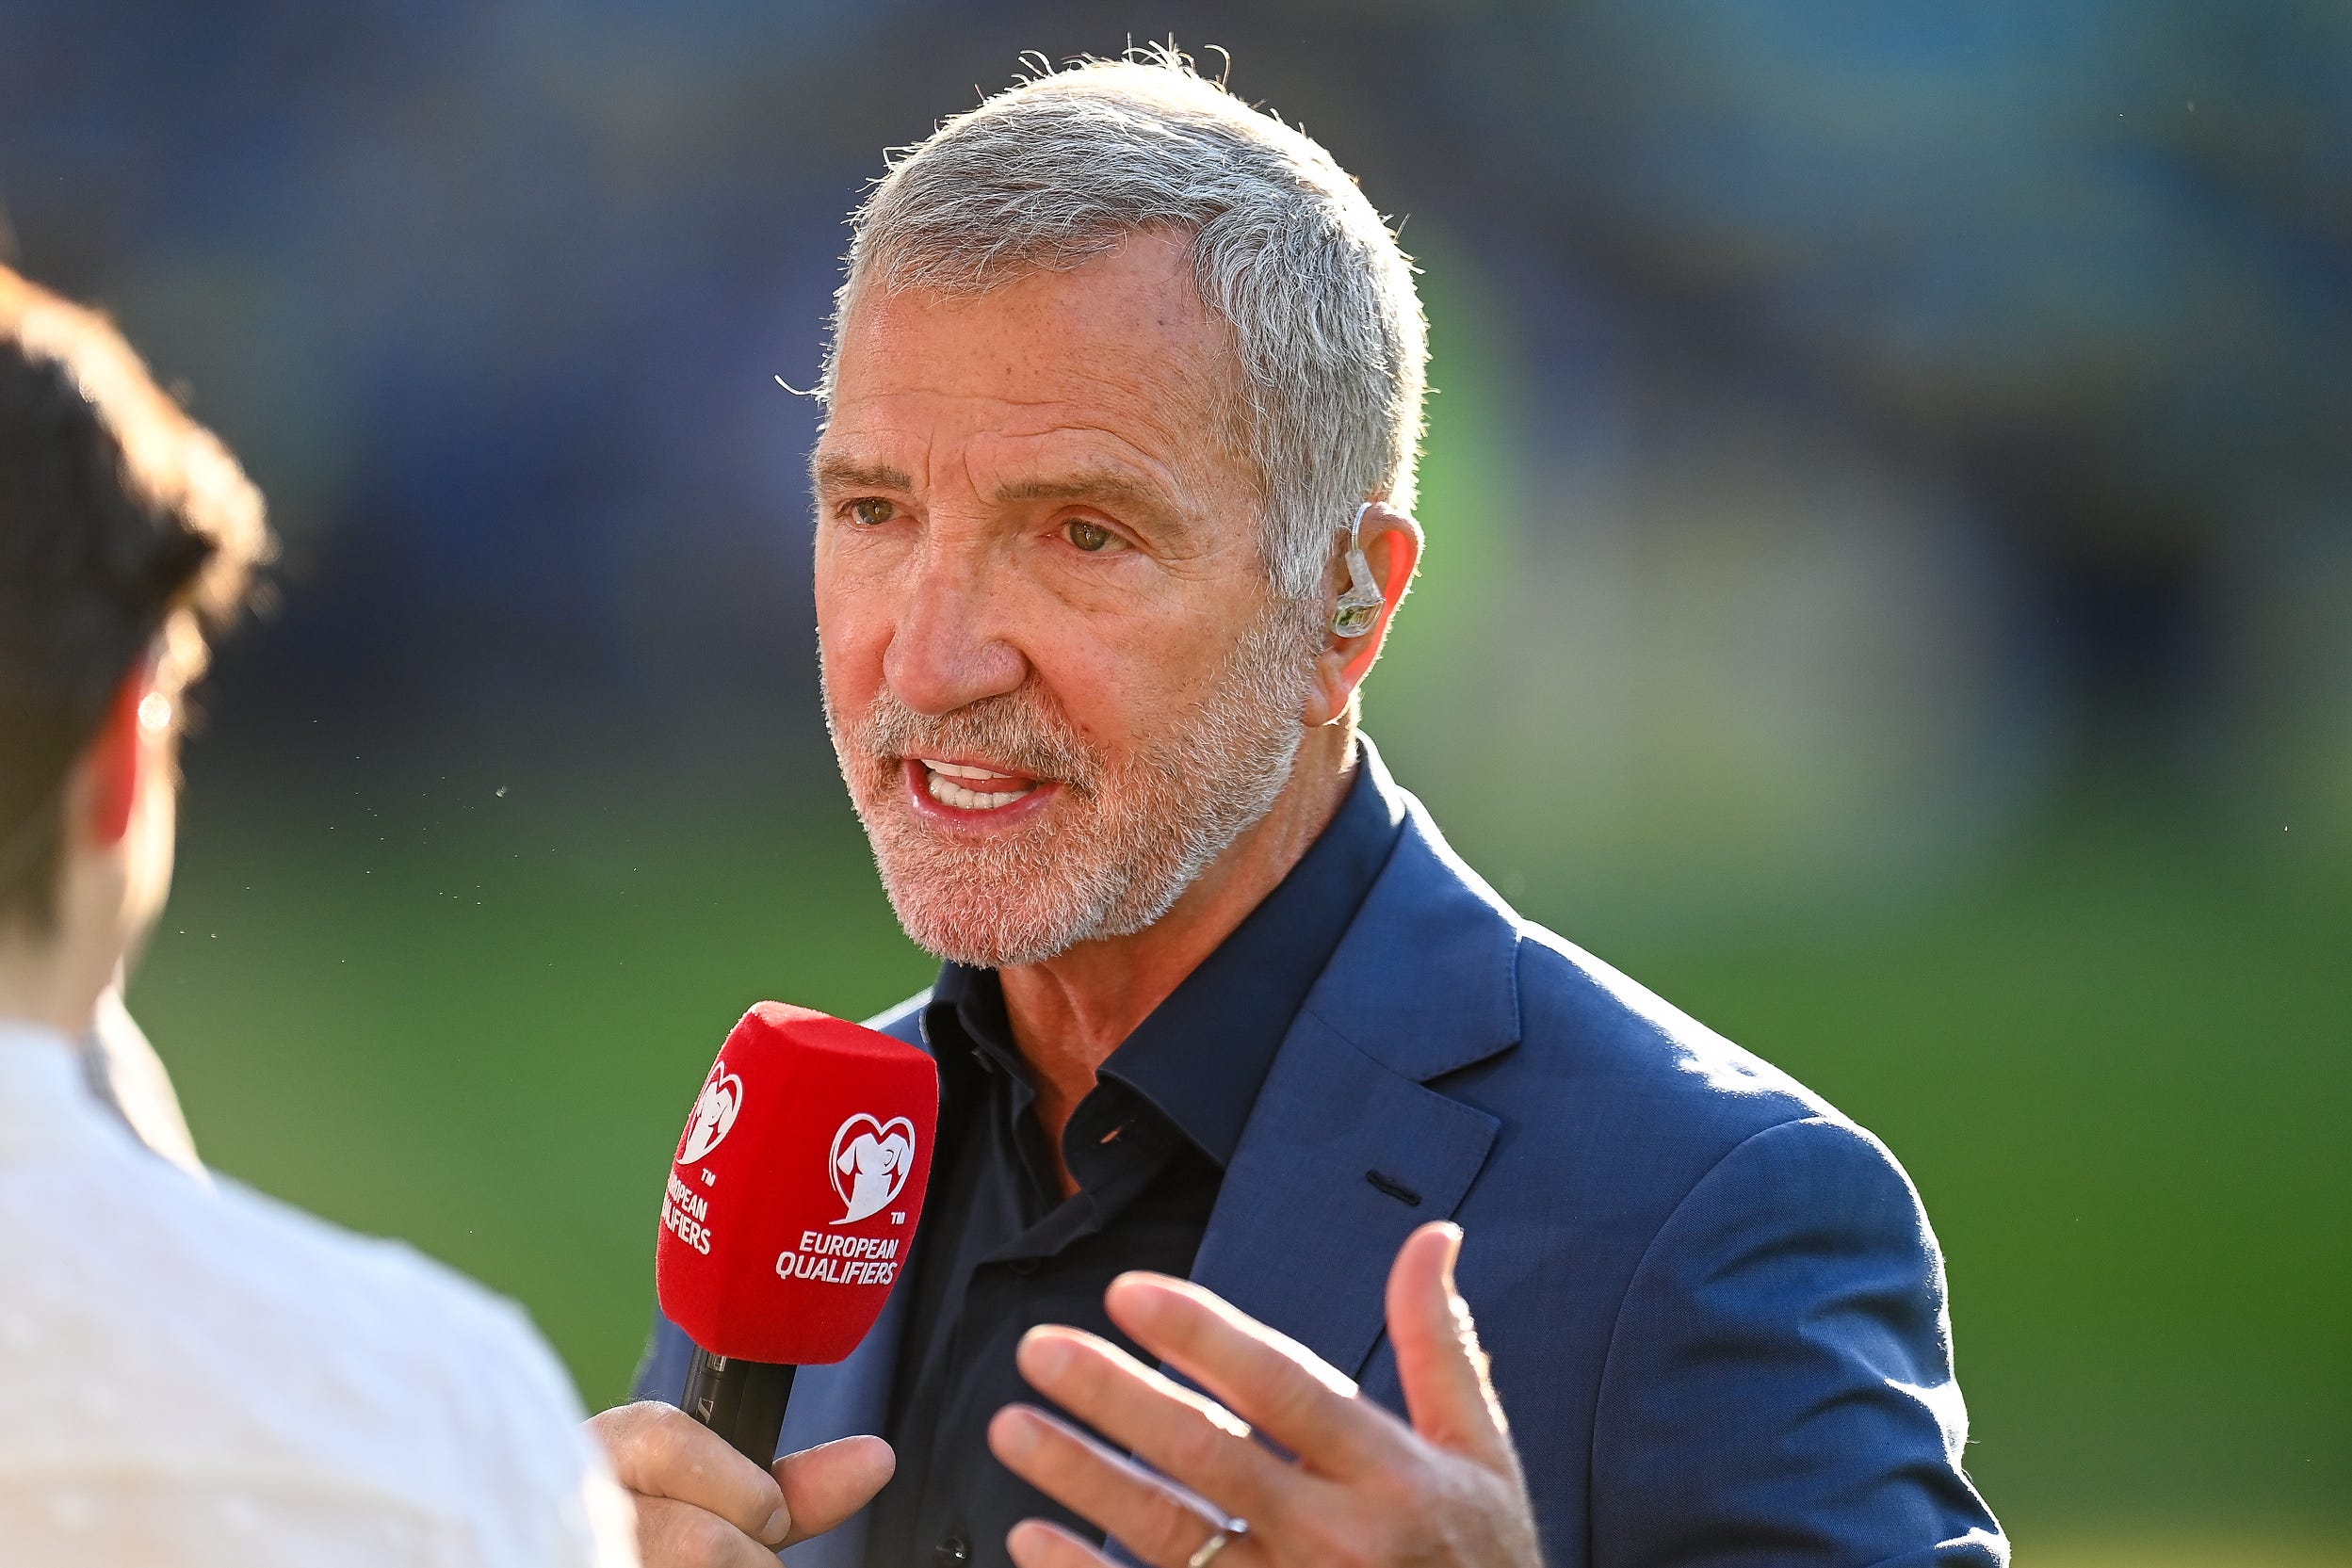 Graeme Souness sees Liverpool finishing first or second in the league this season.